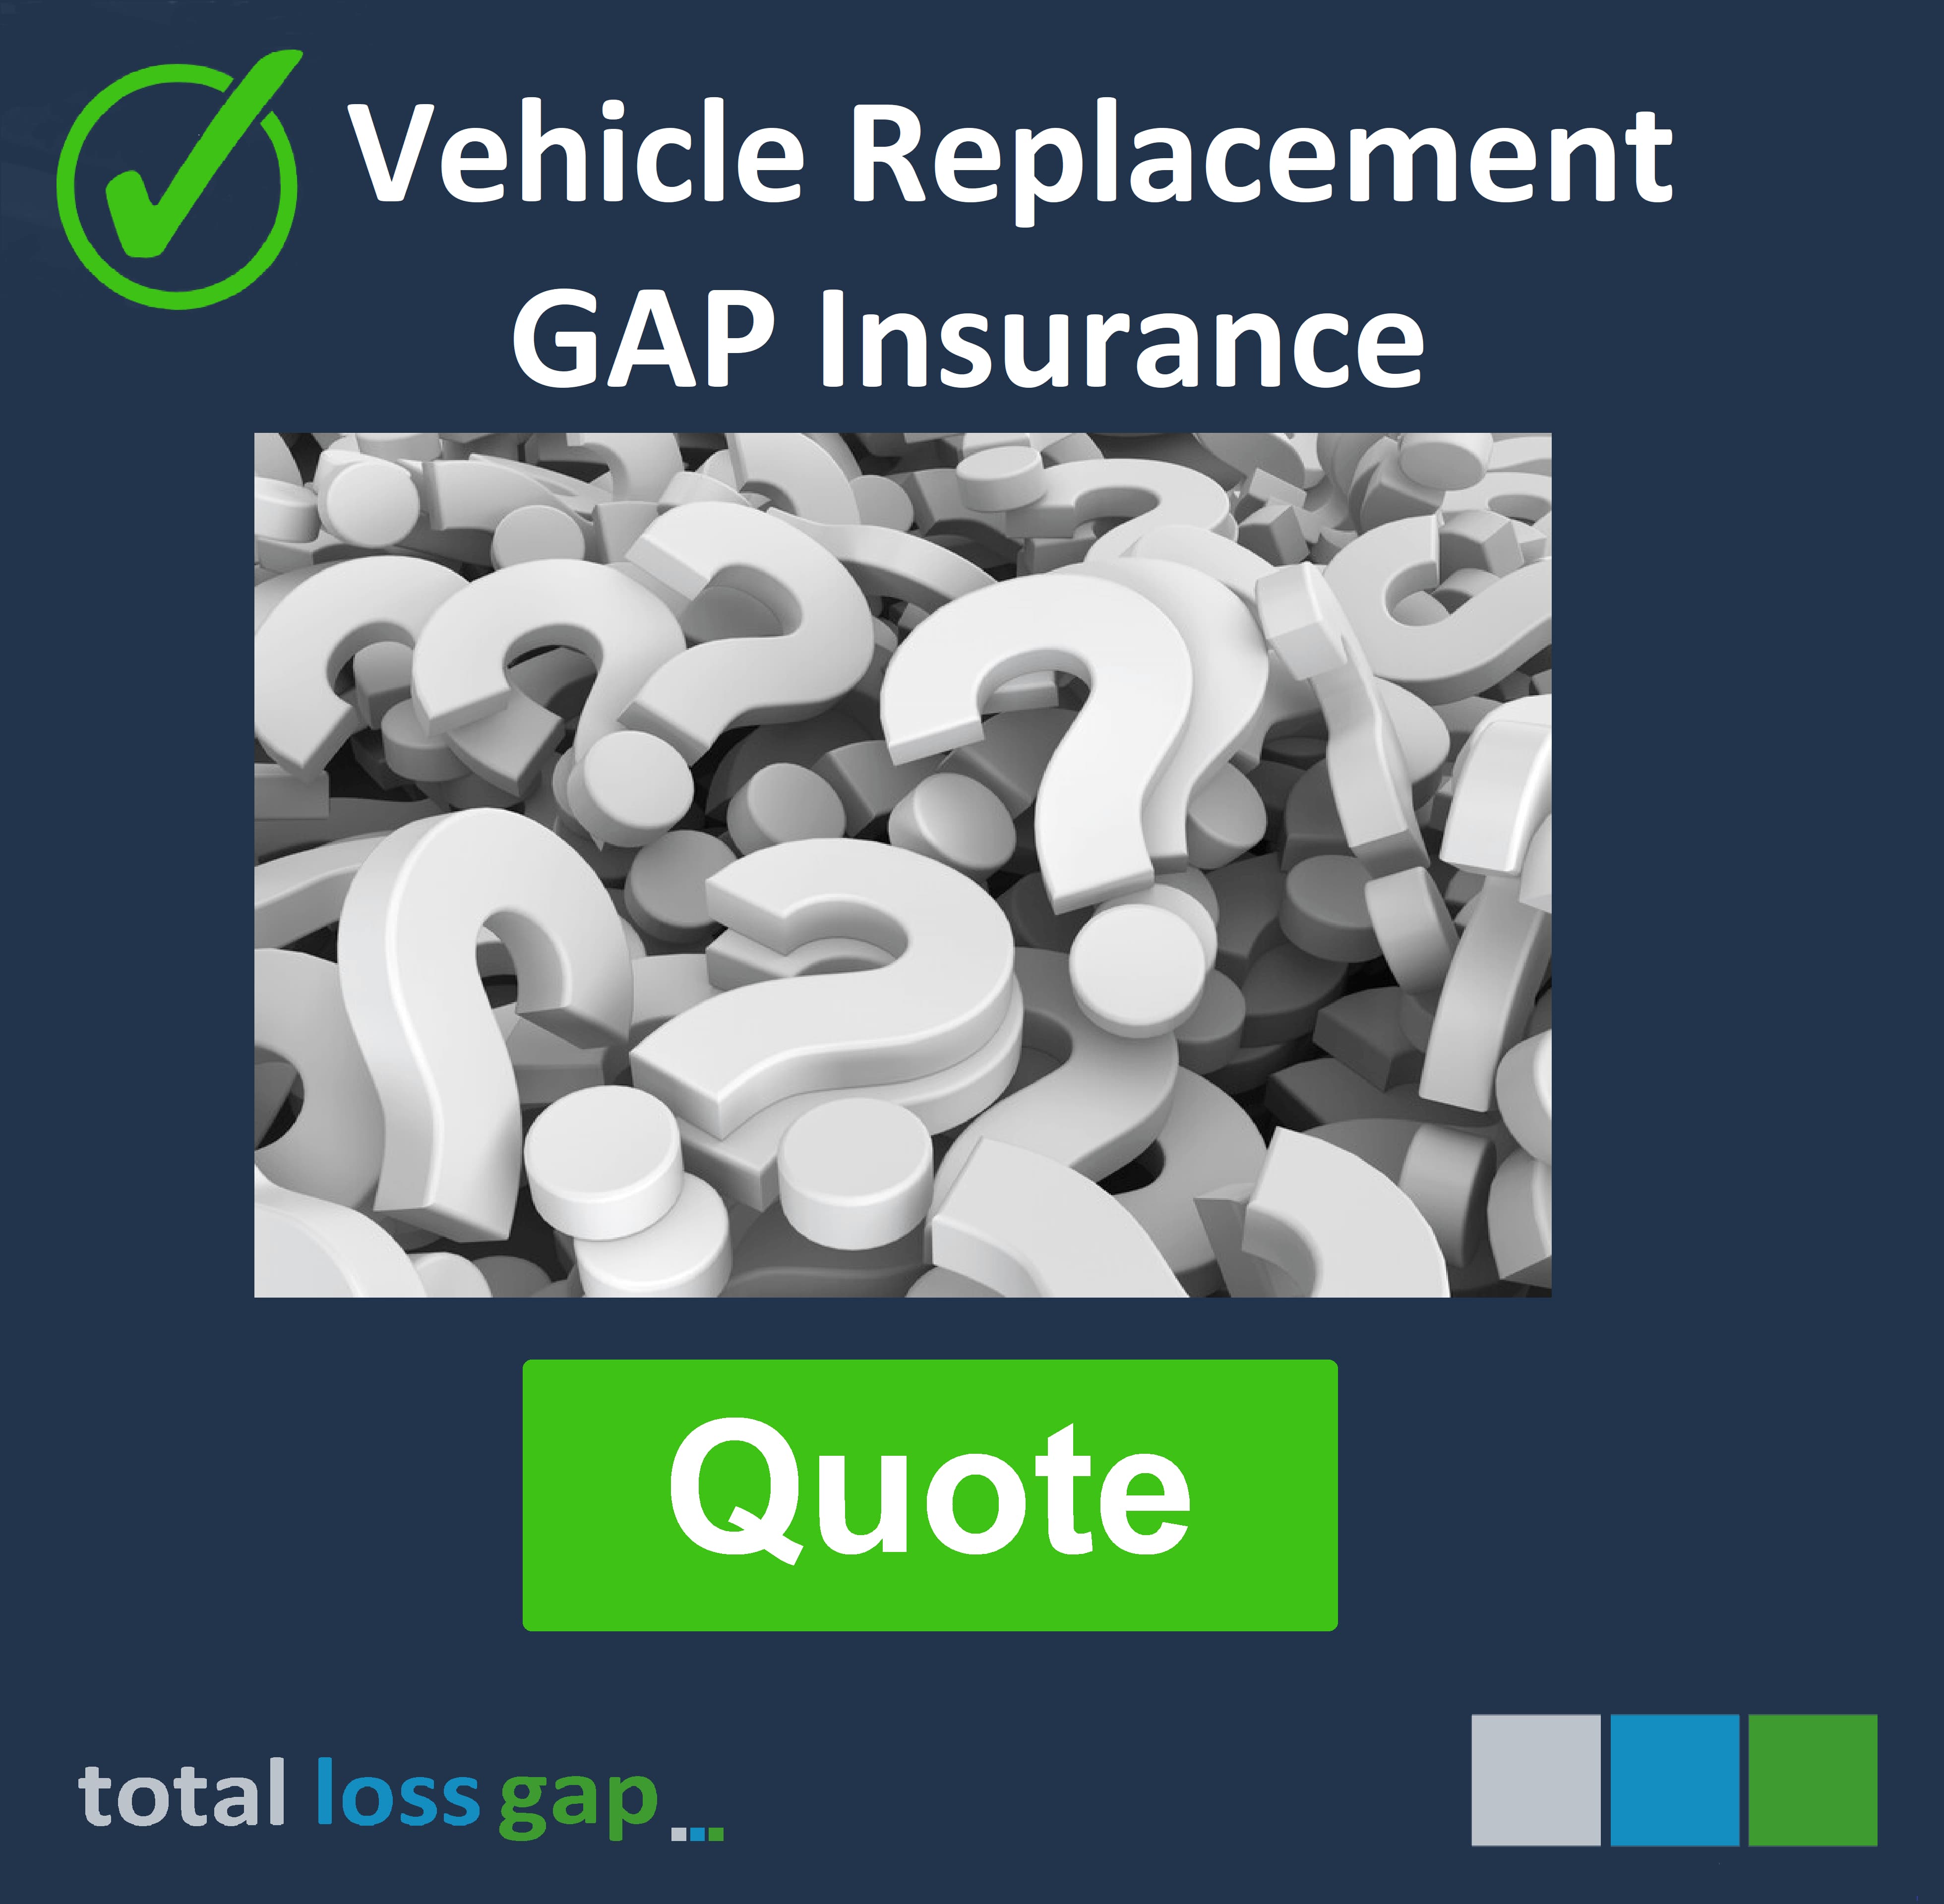 Vehicle Replacement Gap insurance Quote for your Mercedes Benz